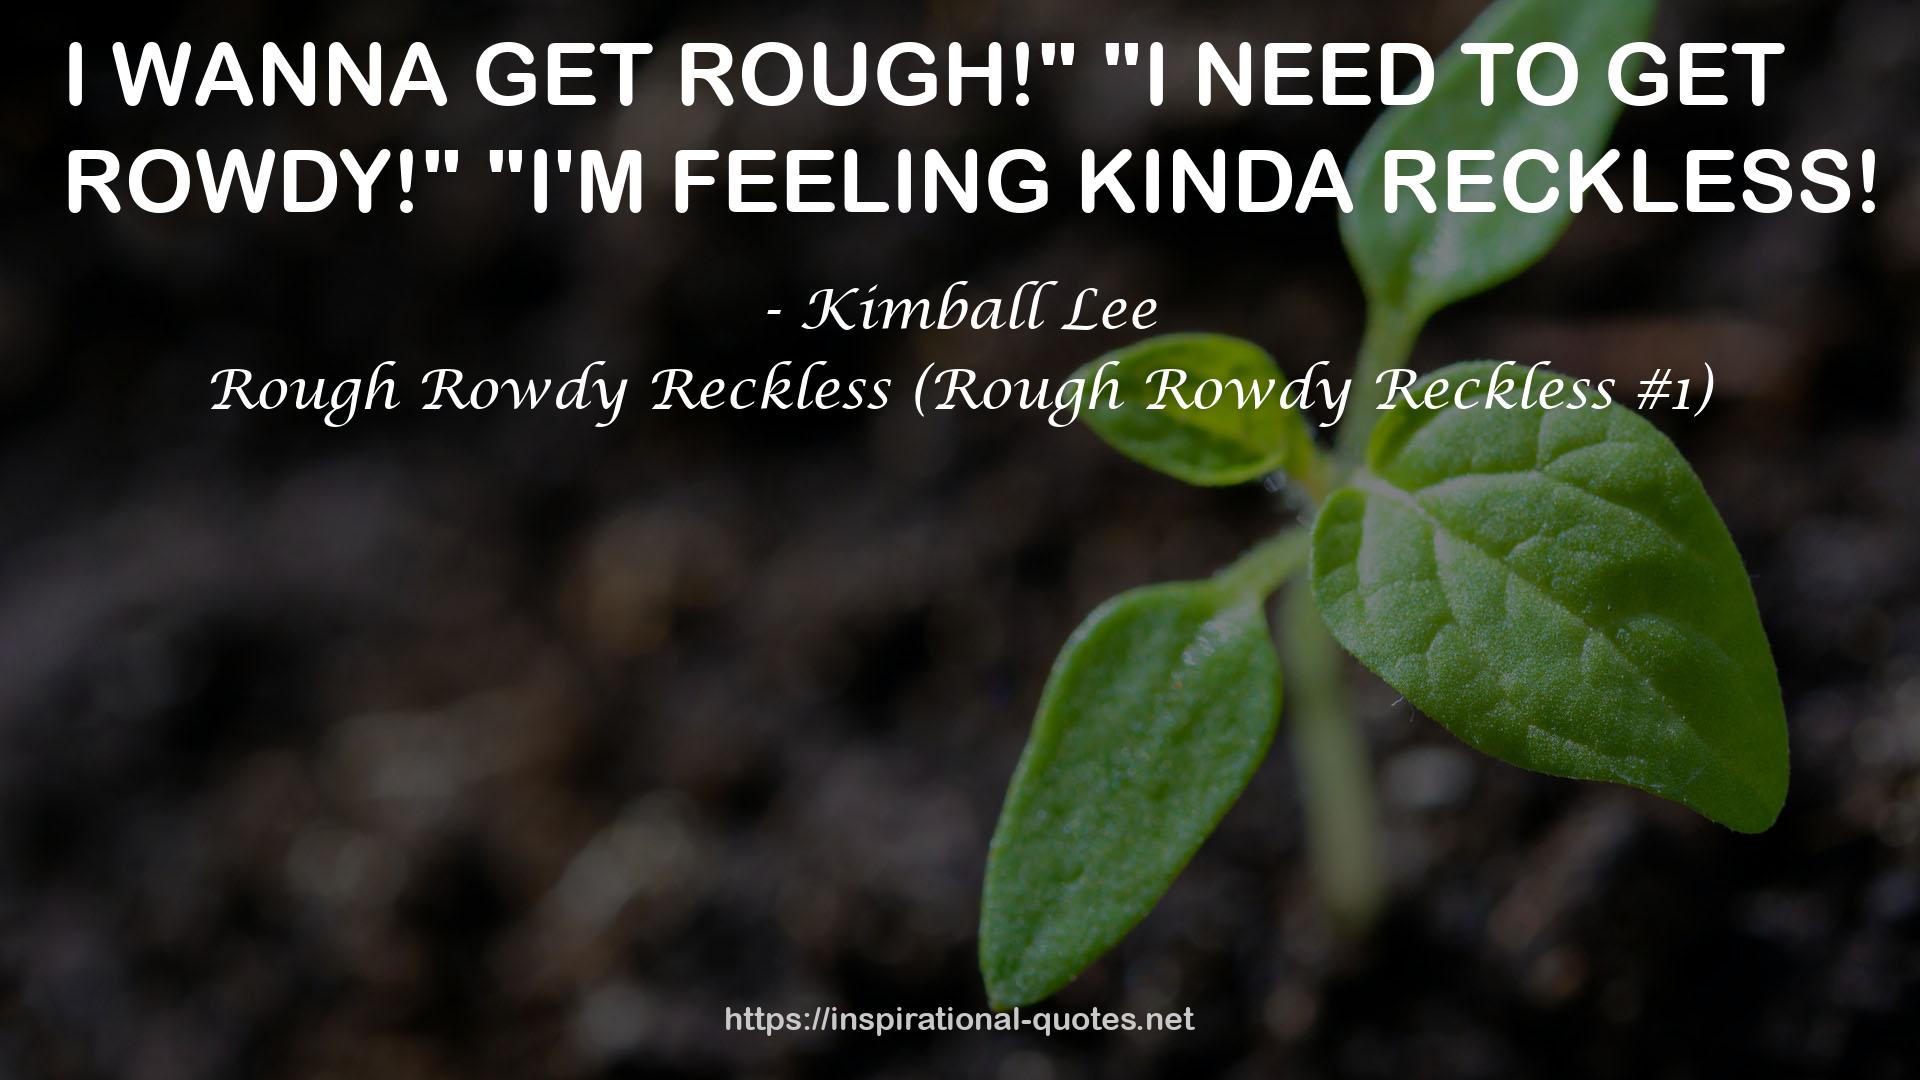 Rough Rowdy Reckless (Rough Rowdy Reckless #1) QUOTES